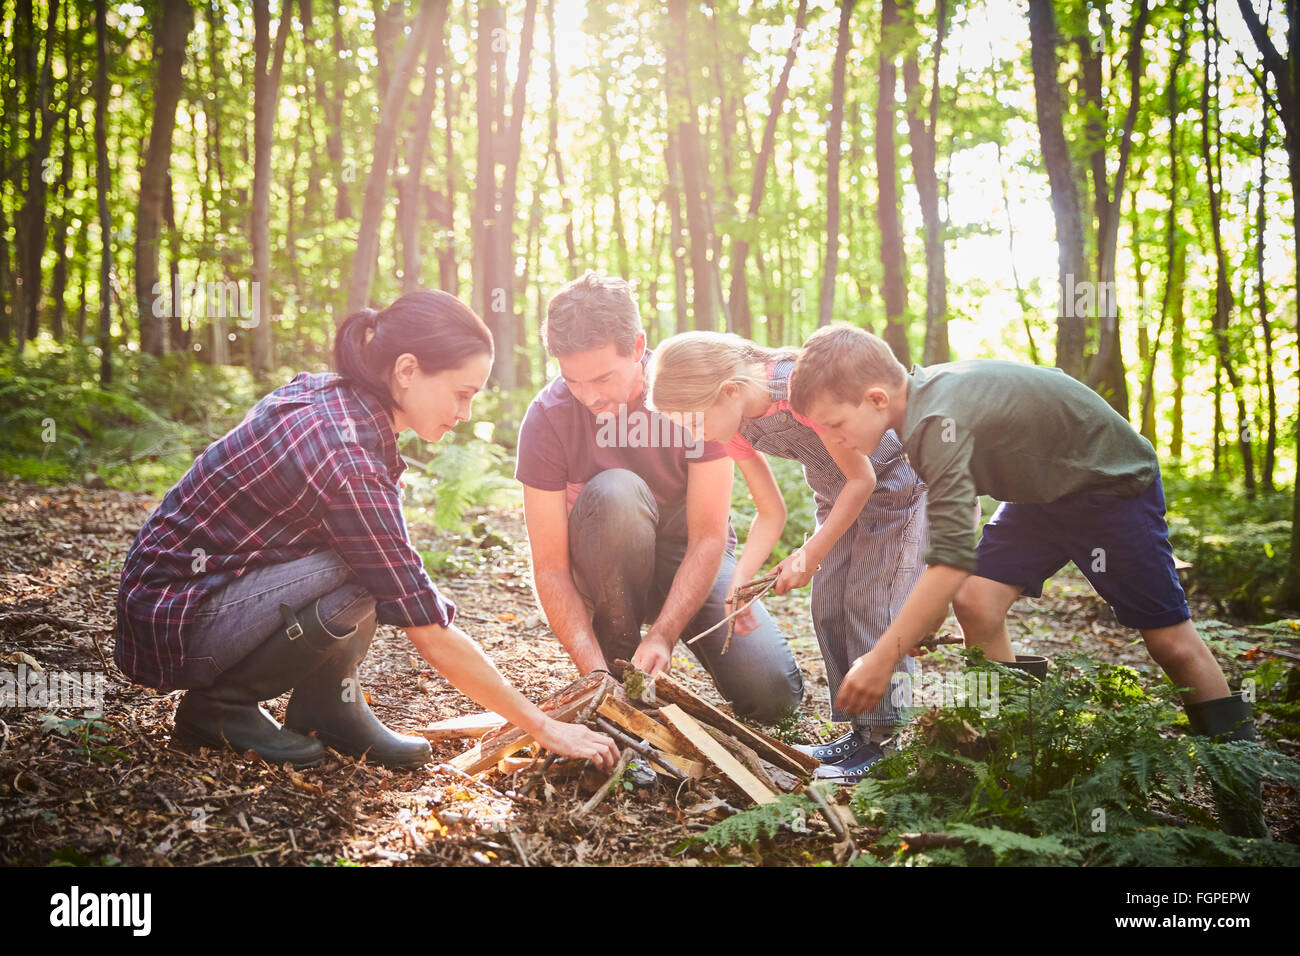 Family building campfire in forest Stock Photo